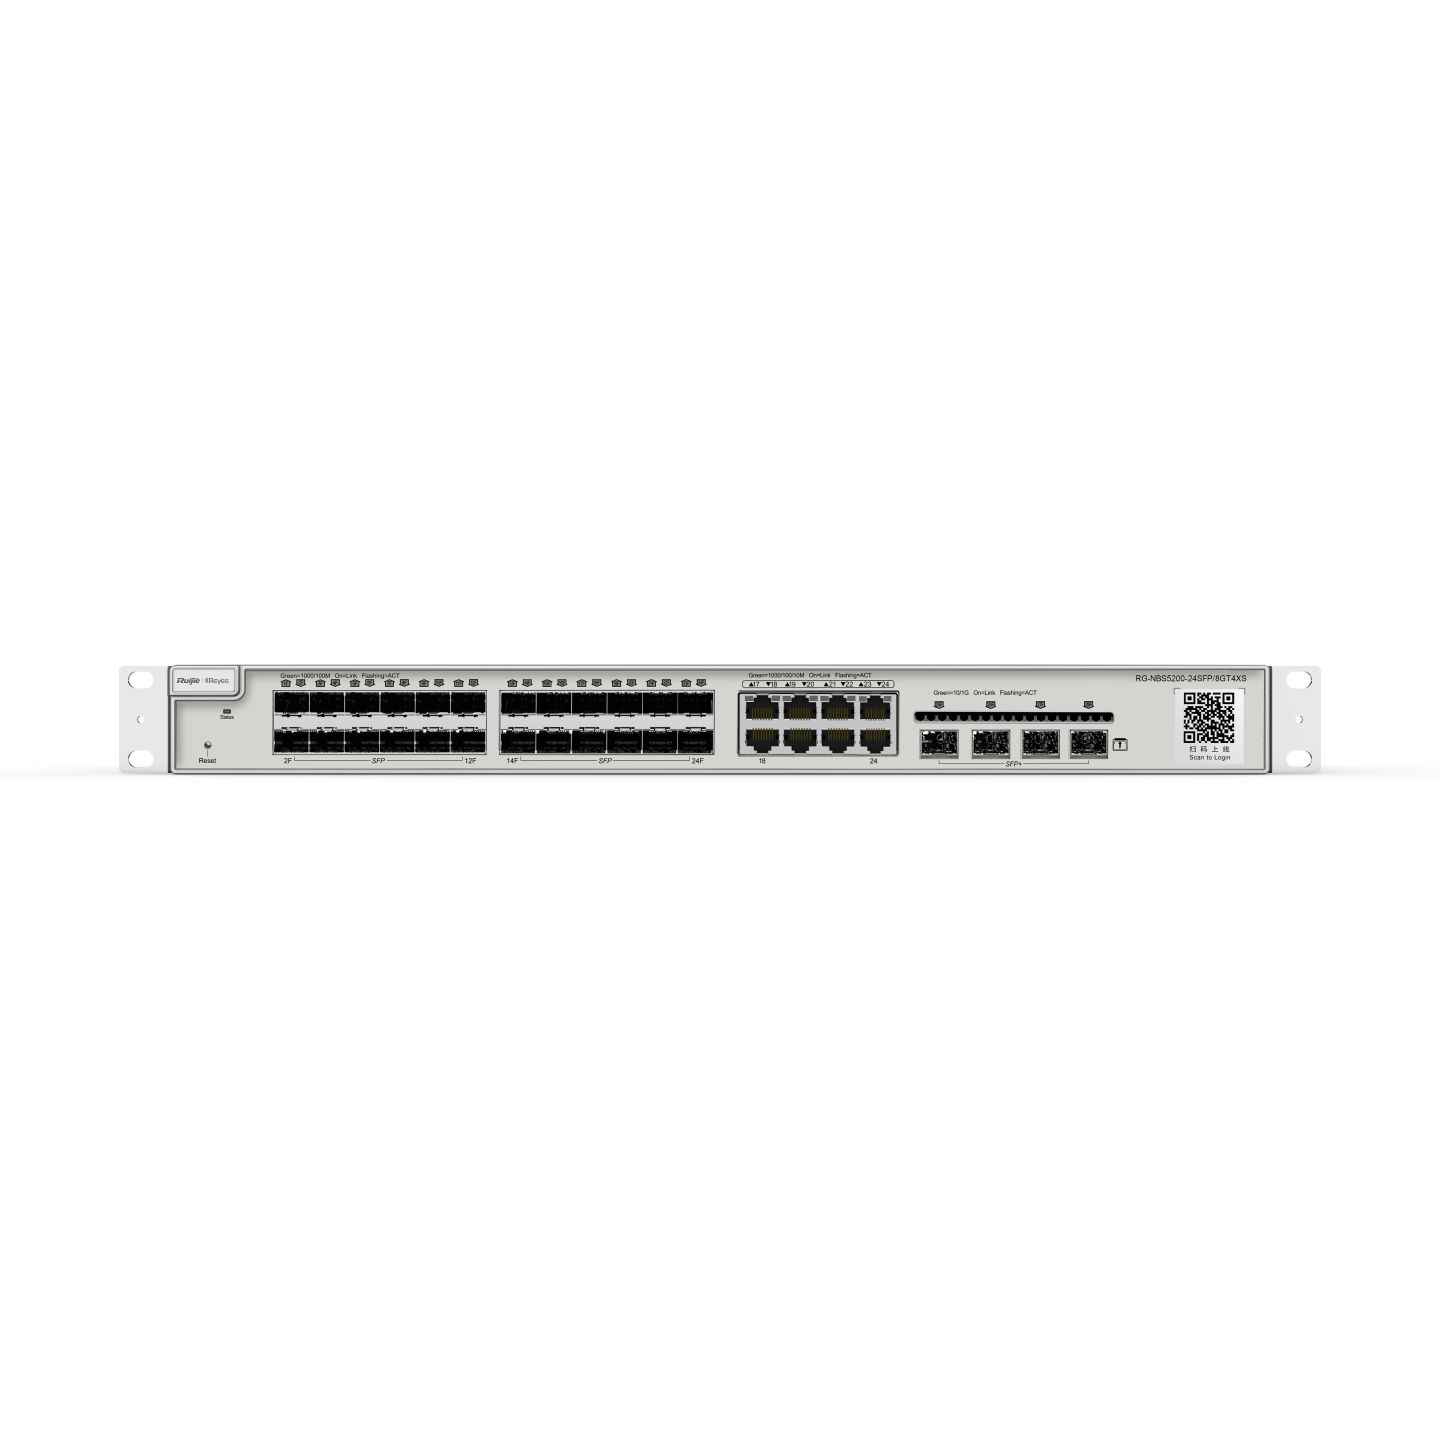 Коммутатор Ruijie Reyee RG-NBS5200-24SFP/8GT4XS 24 port gigabit managed poe switch with 4 10g sfp ports support 802 3af at poe 1 console port 19 inch rack mount support l2 l2 features